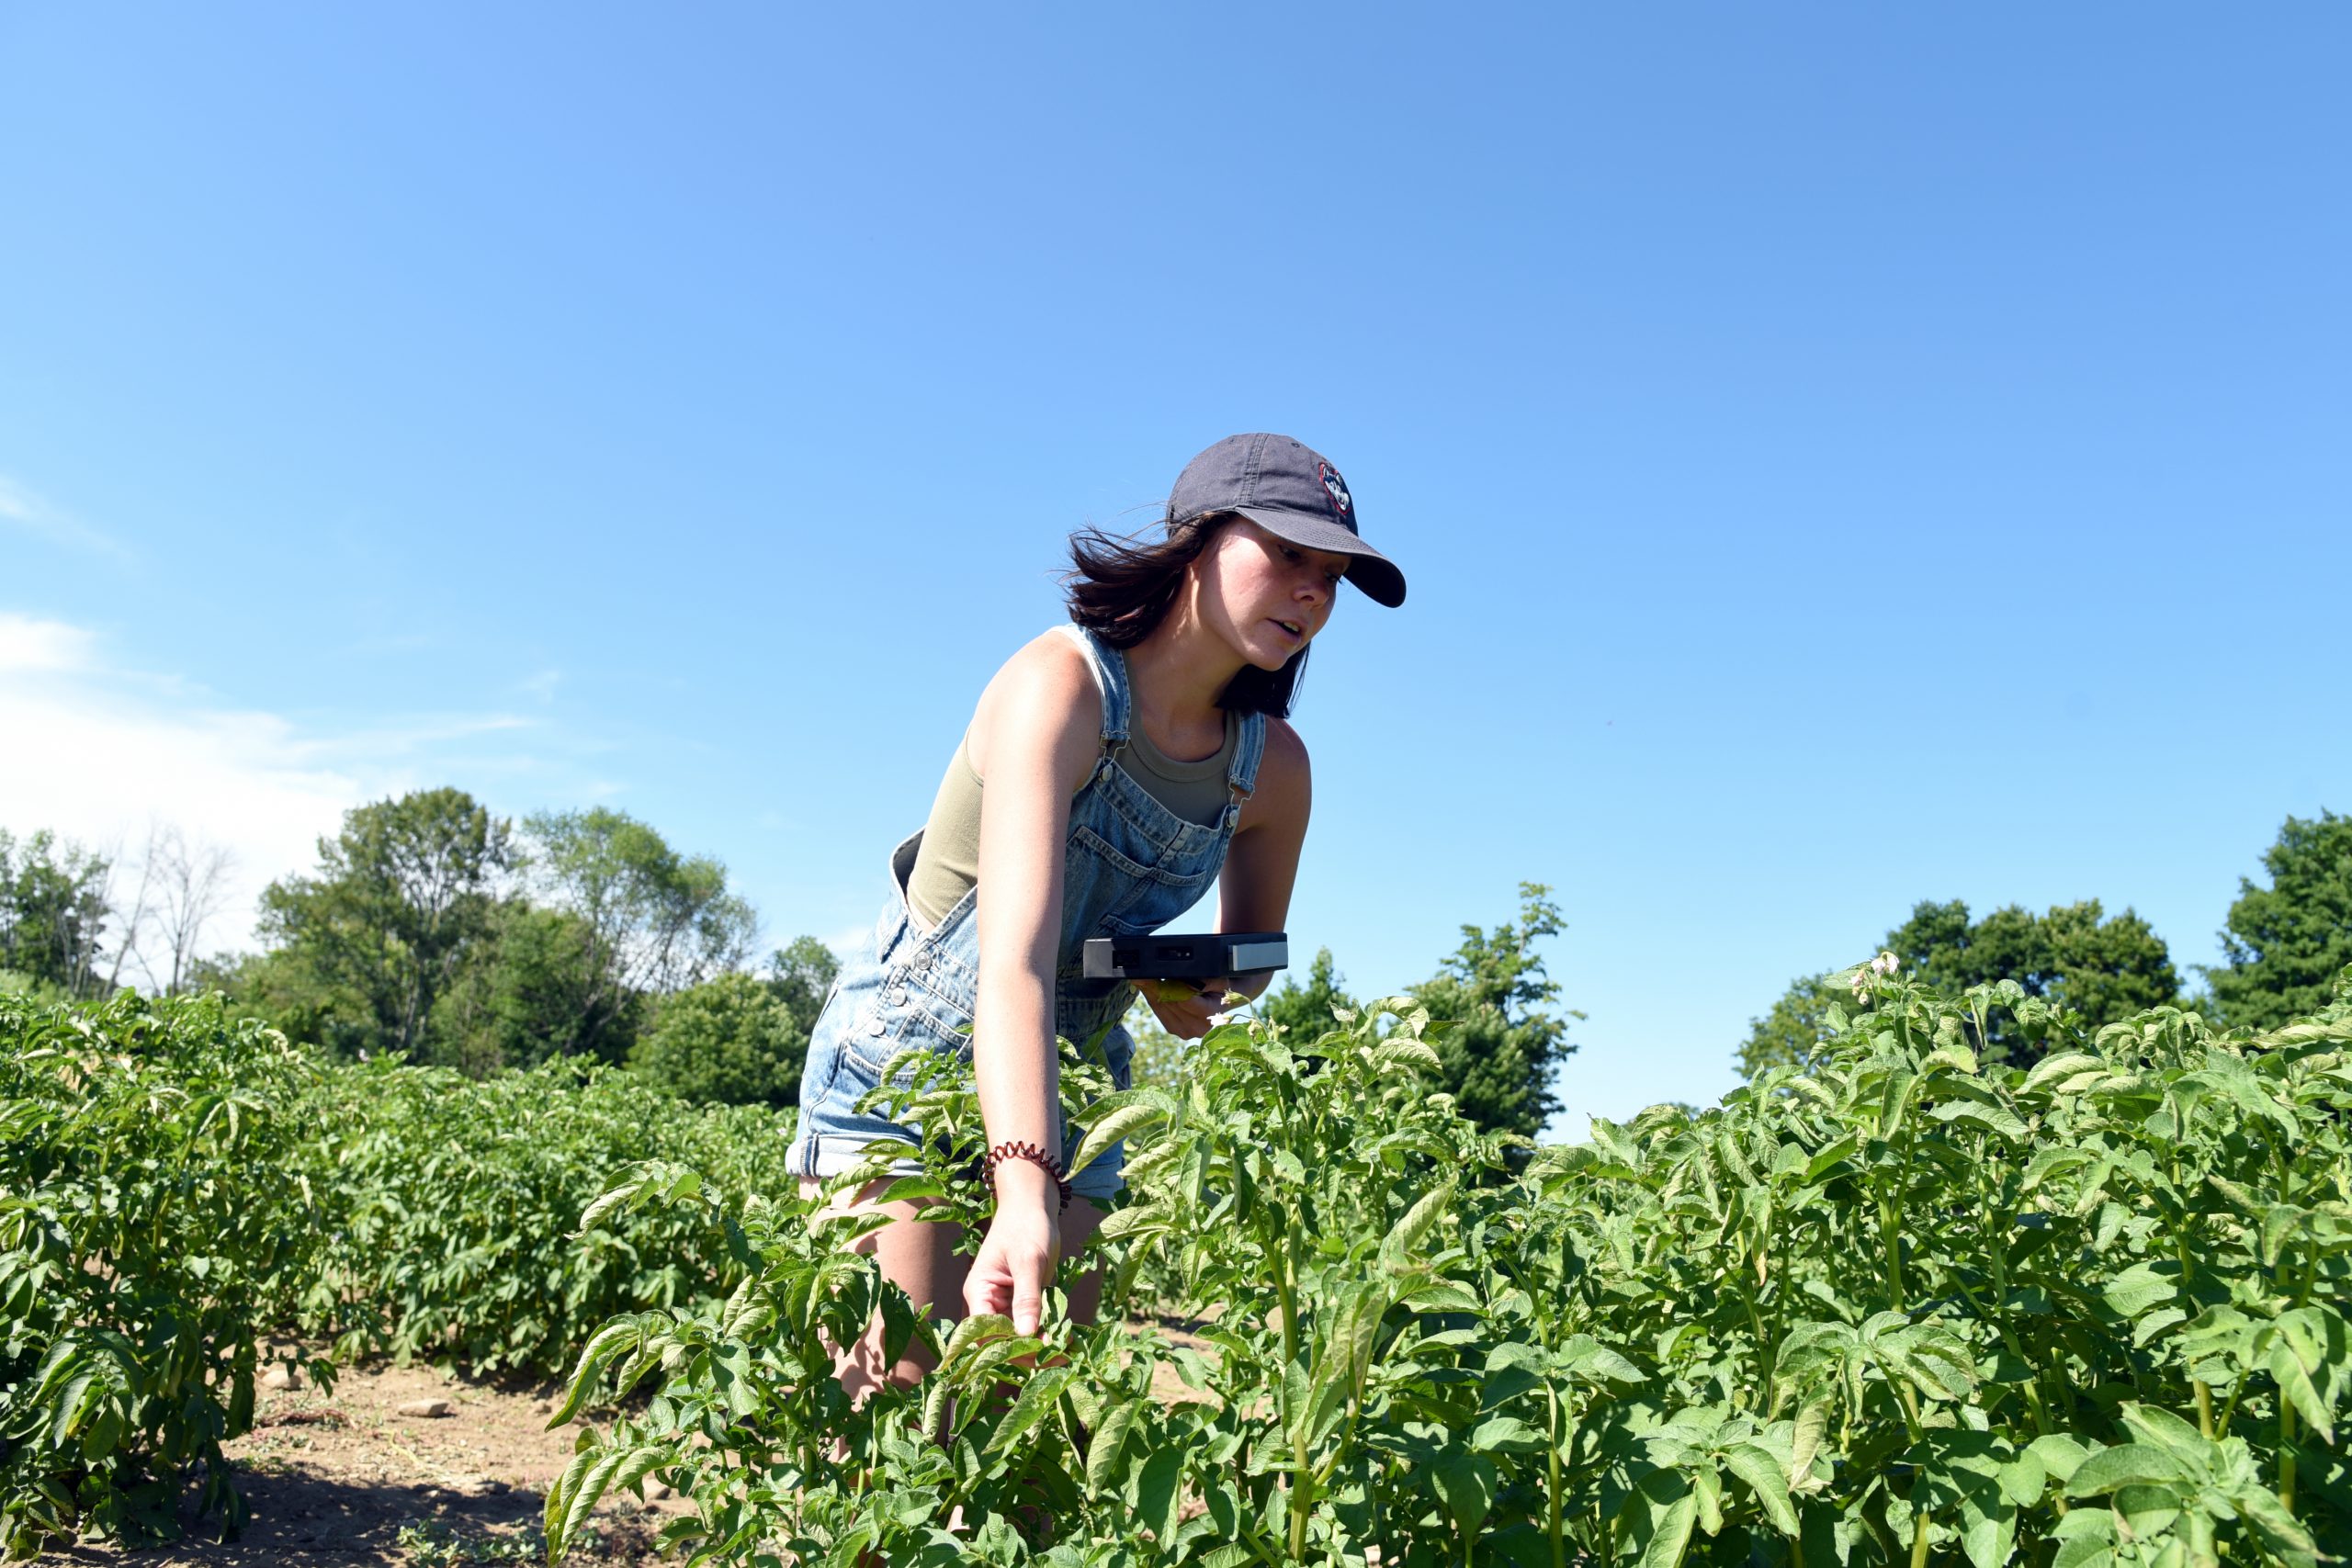 student studies the leaves of potato crops to check for damage